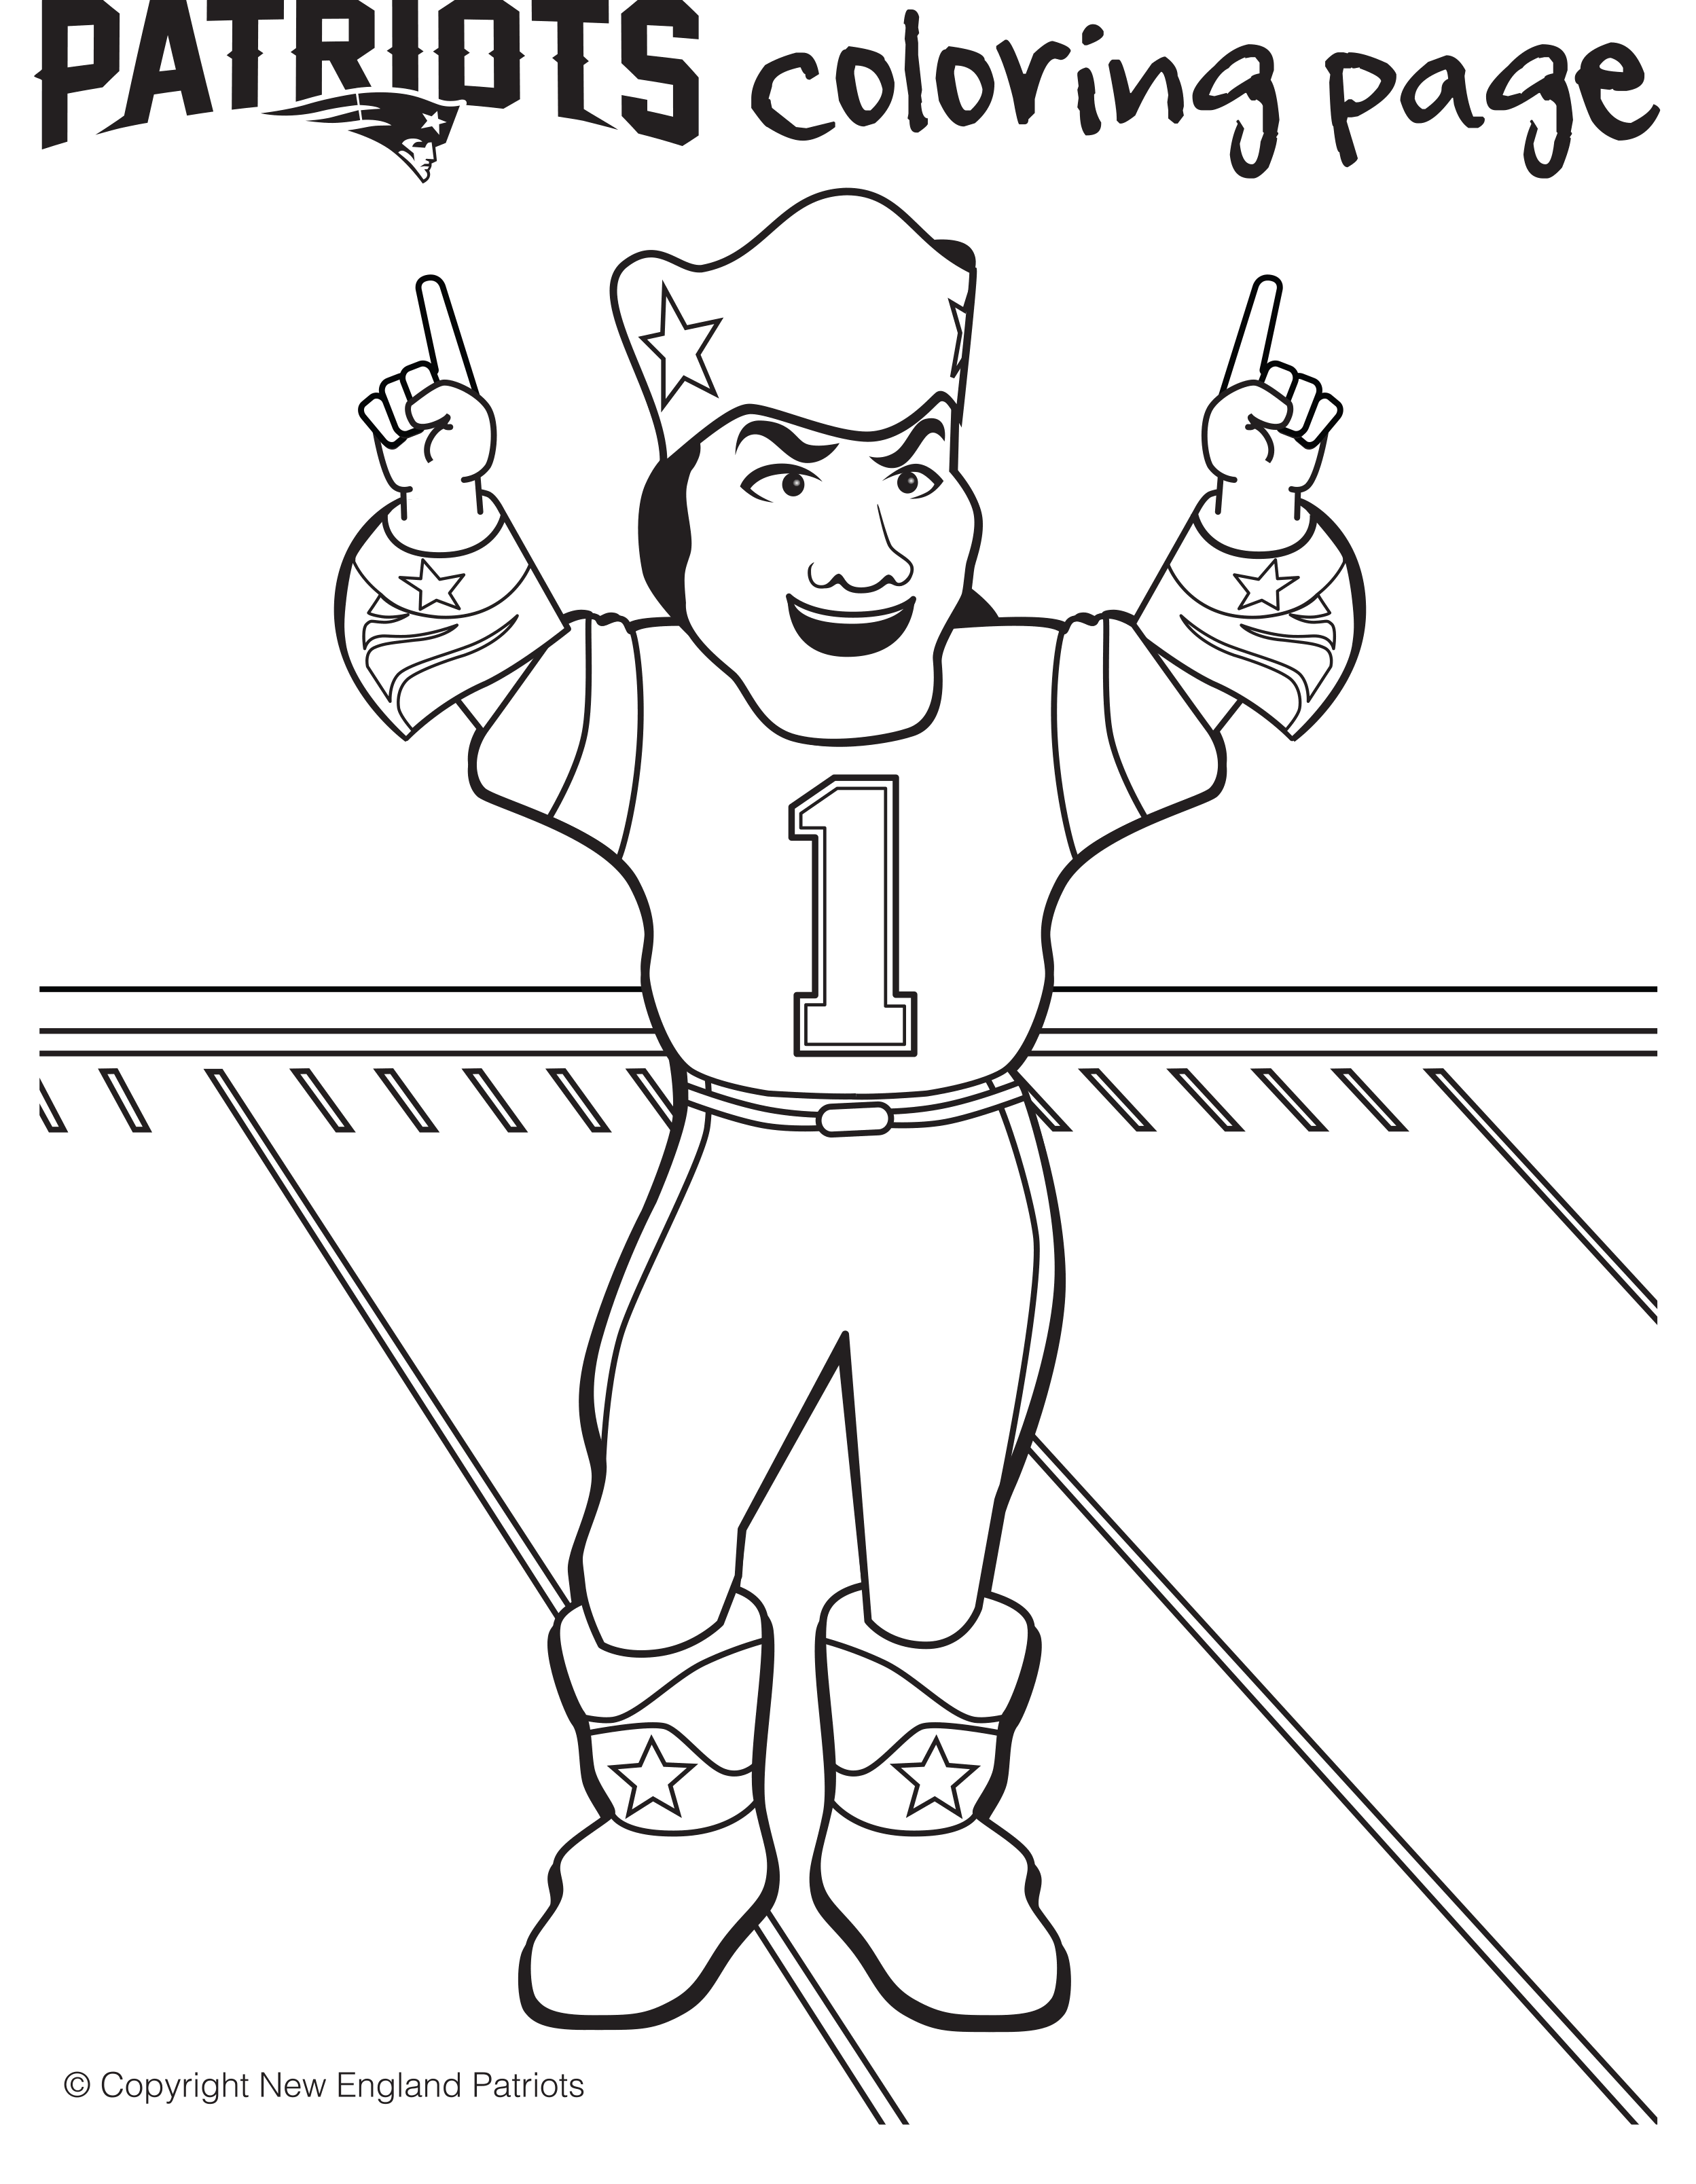 38+ great image Nfl Mascot Coloring Pages - The three gayest logos in